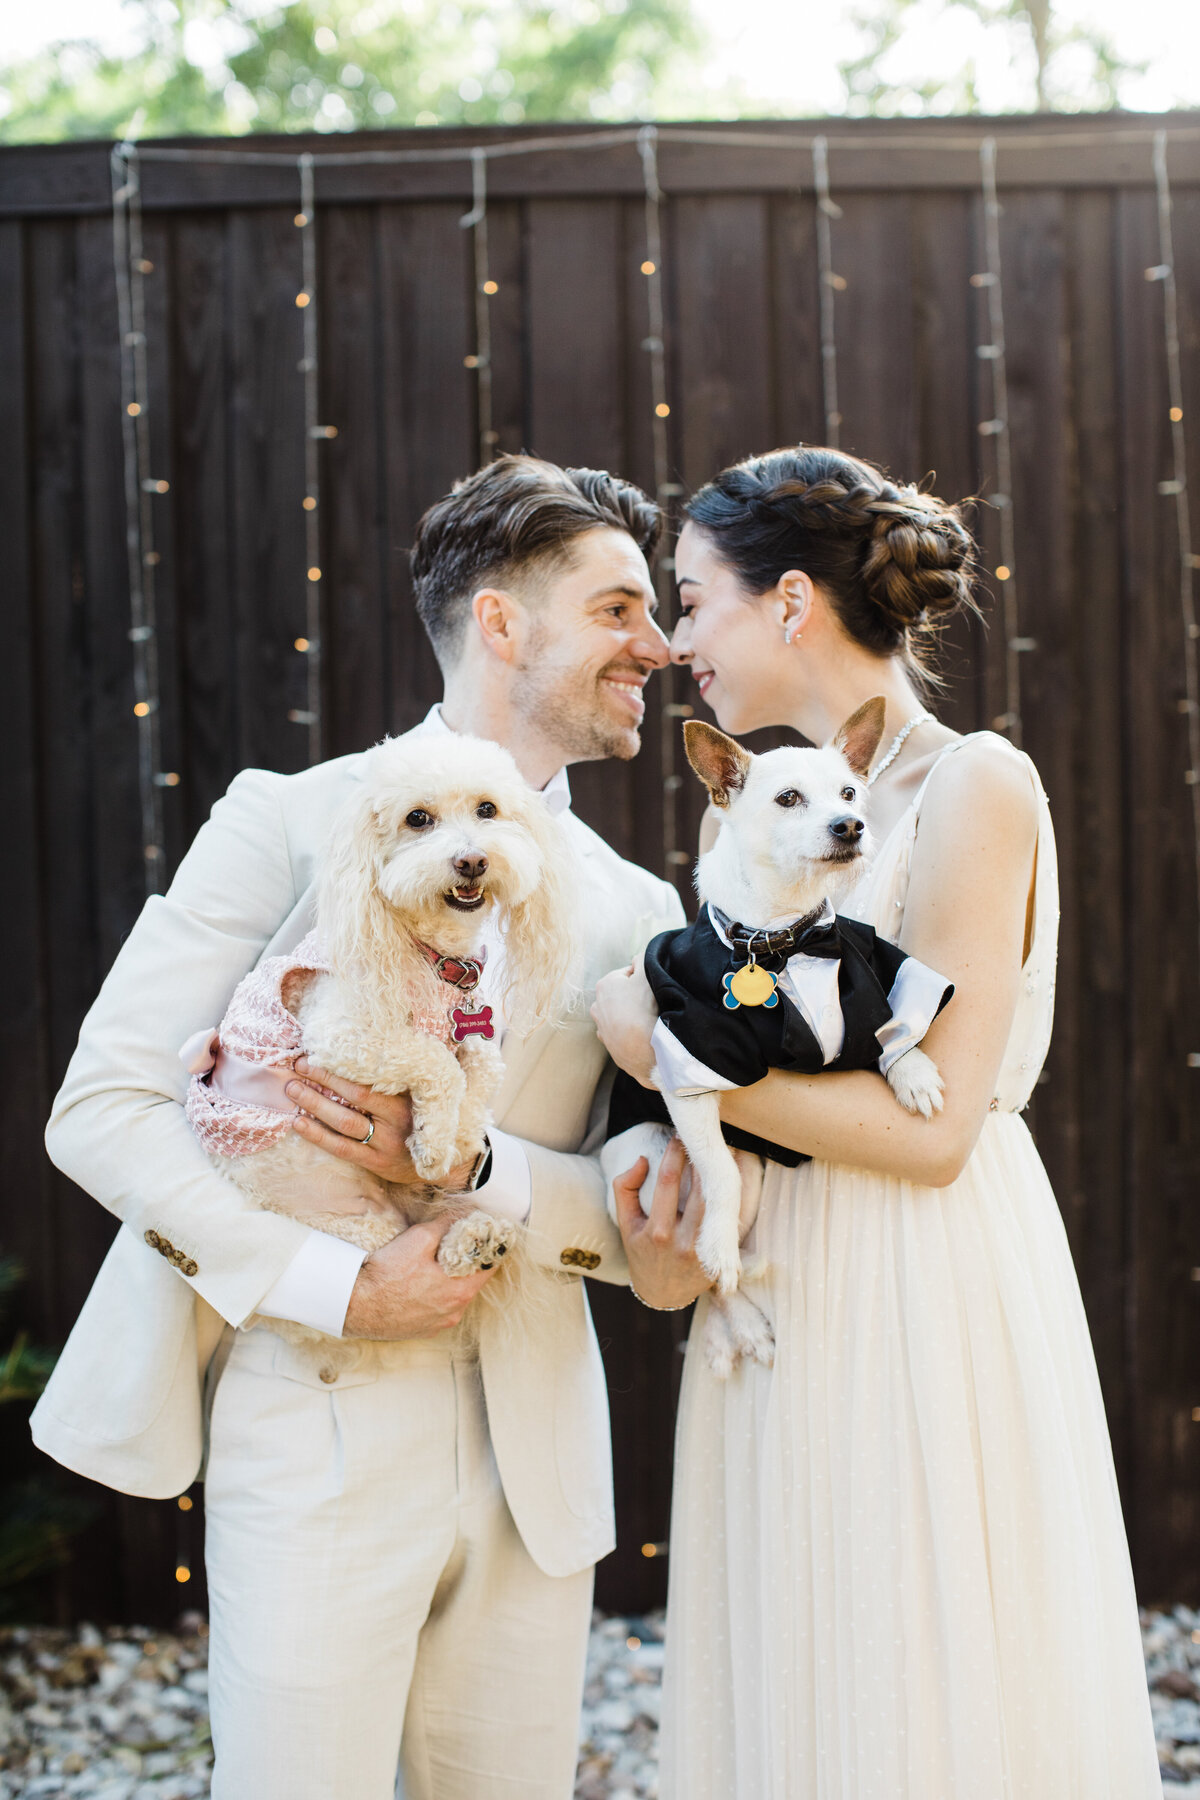 Portrait of a bride, groom, and their two dogs posing in front of a fence covered in string lights during their elopement in Dallas, Texas. The bride is on the right and is wearing a short sleeve, white dress. She's holding a short haired, white dog wearing a little dg tuxedo with a bowtie on his collar. The groom is on the left and is wearing a cream suit. He's holding a curly haired, white dog who's wearing a detailed dog wedding dress.